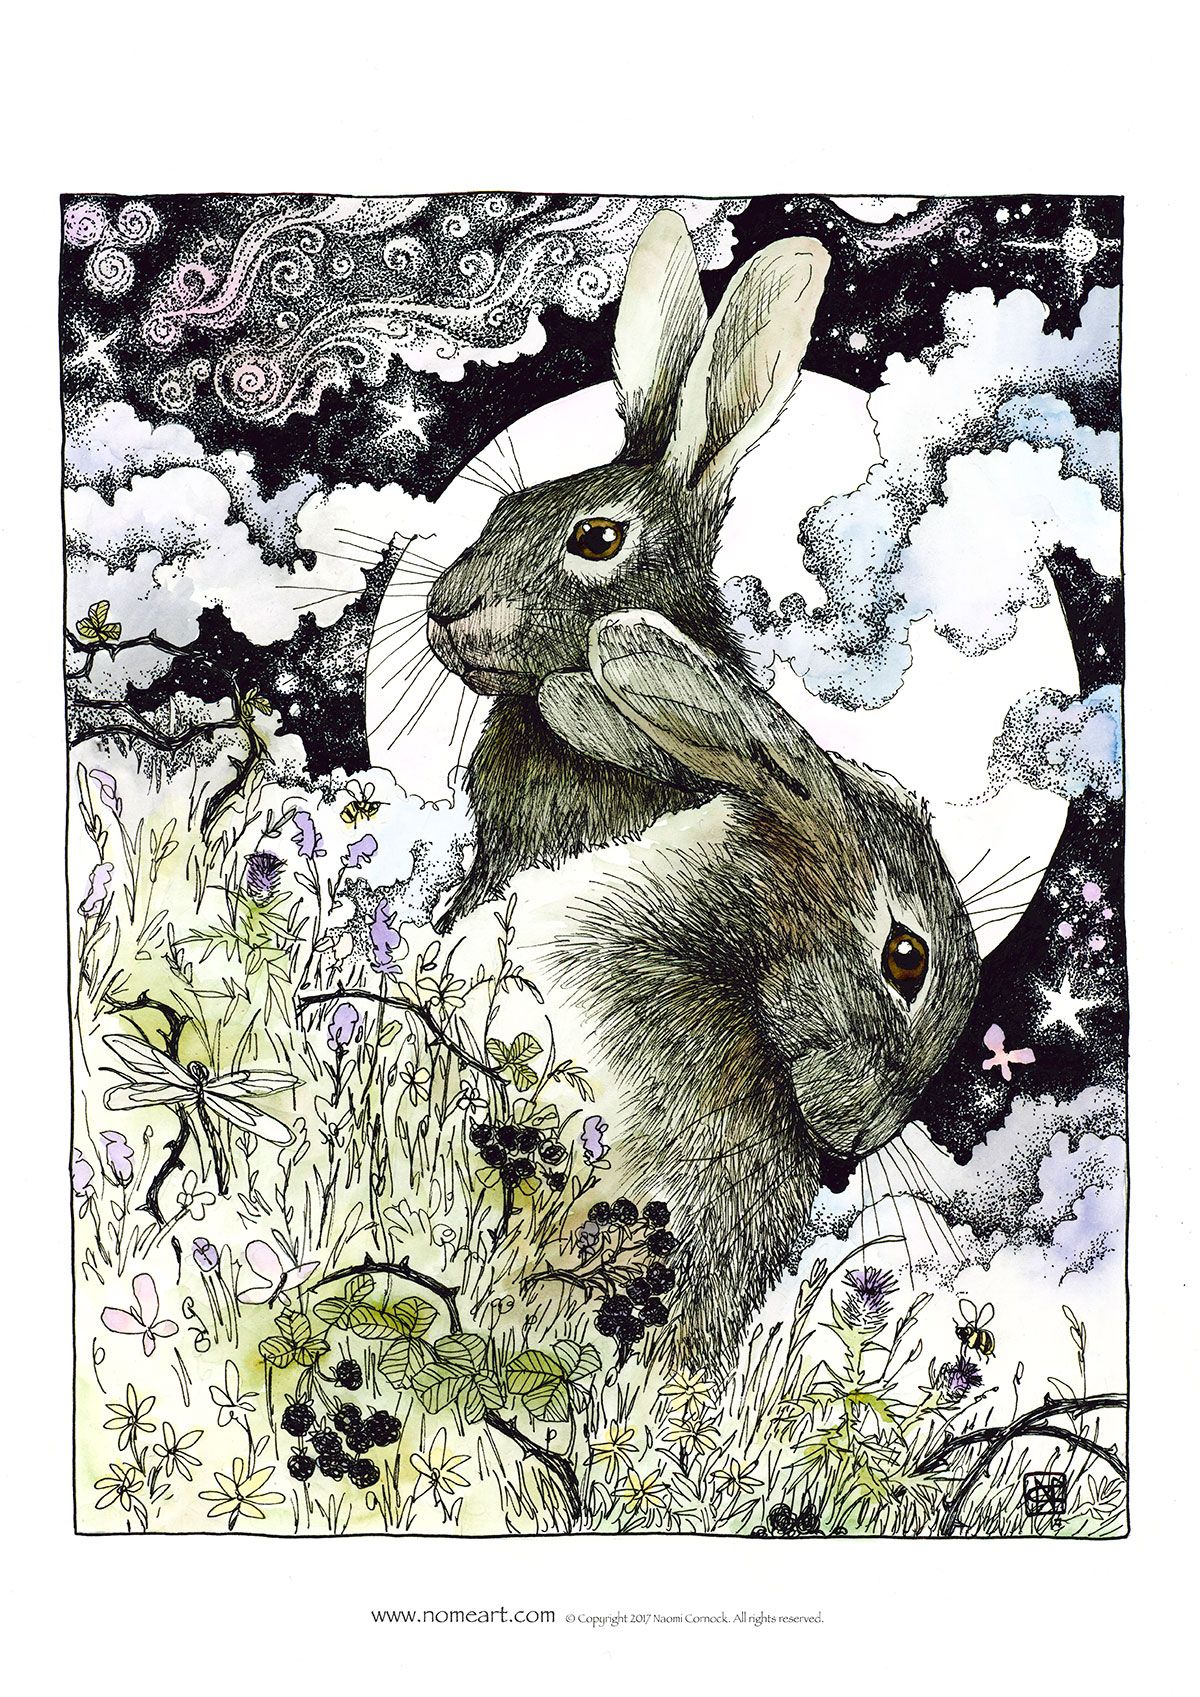 Hares in the Hedgerows